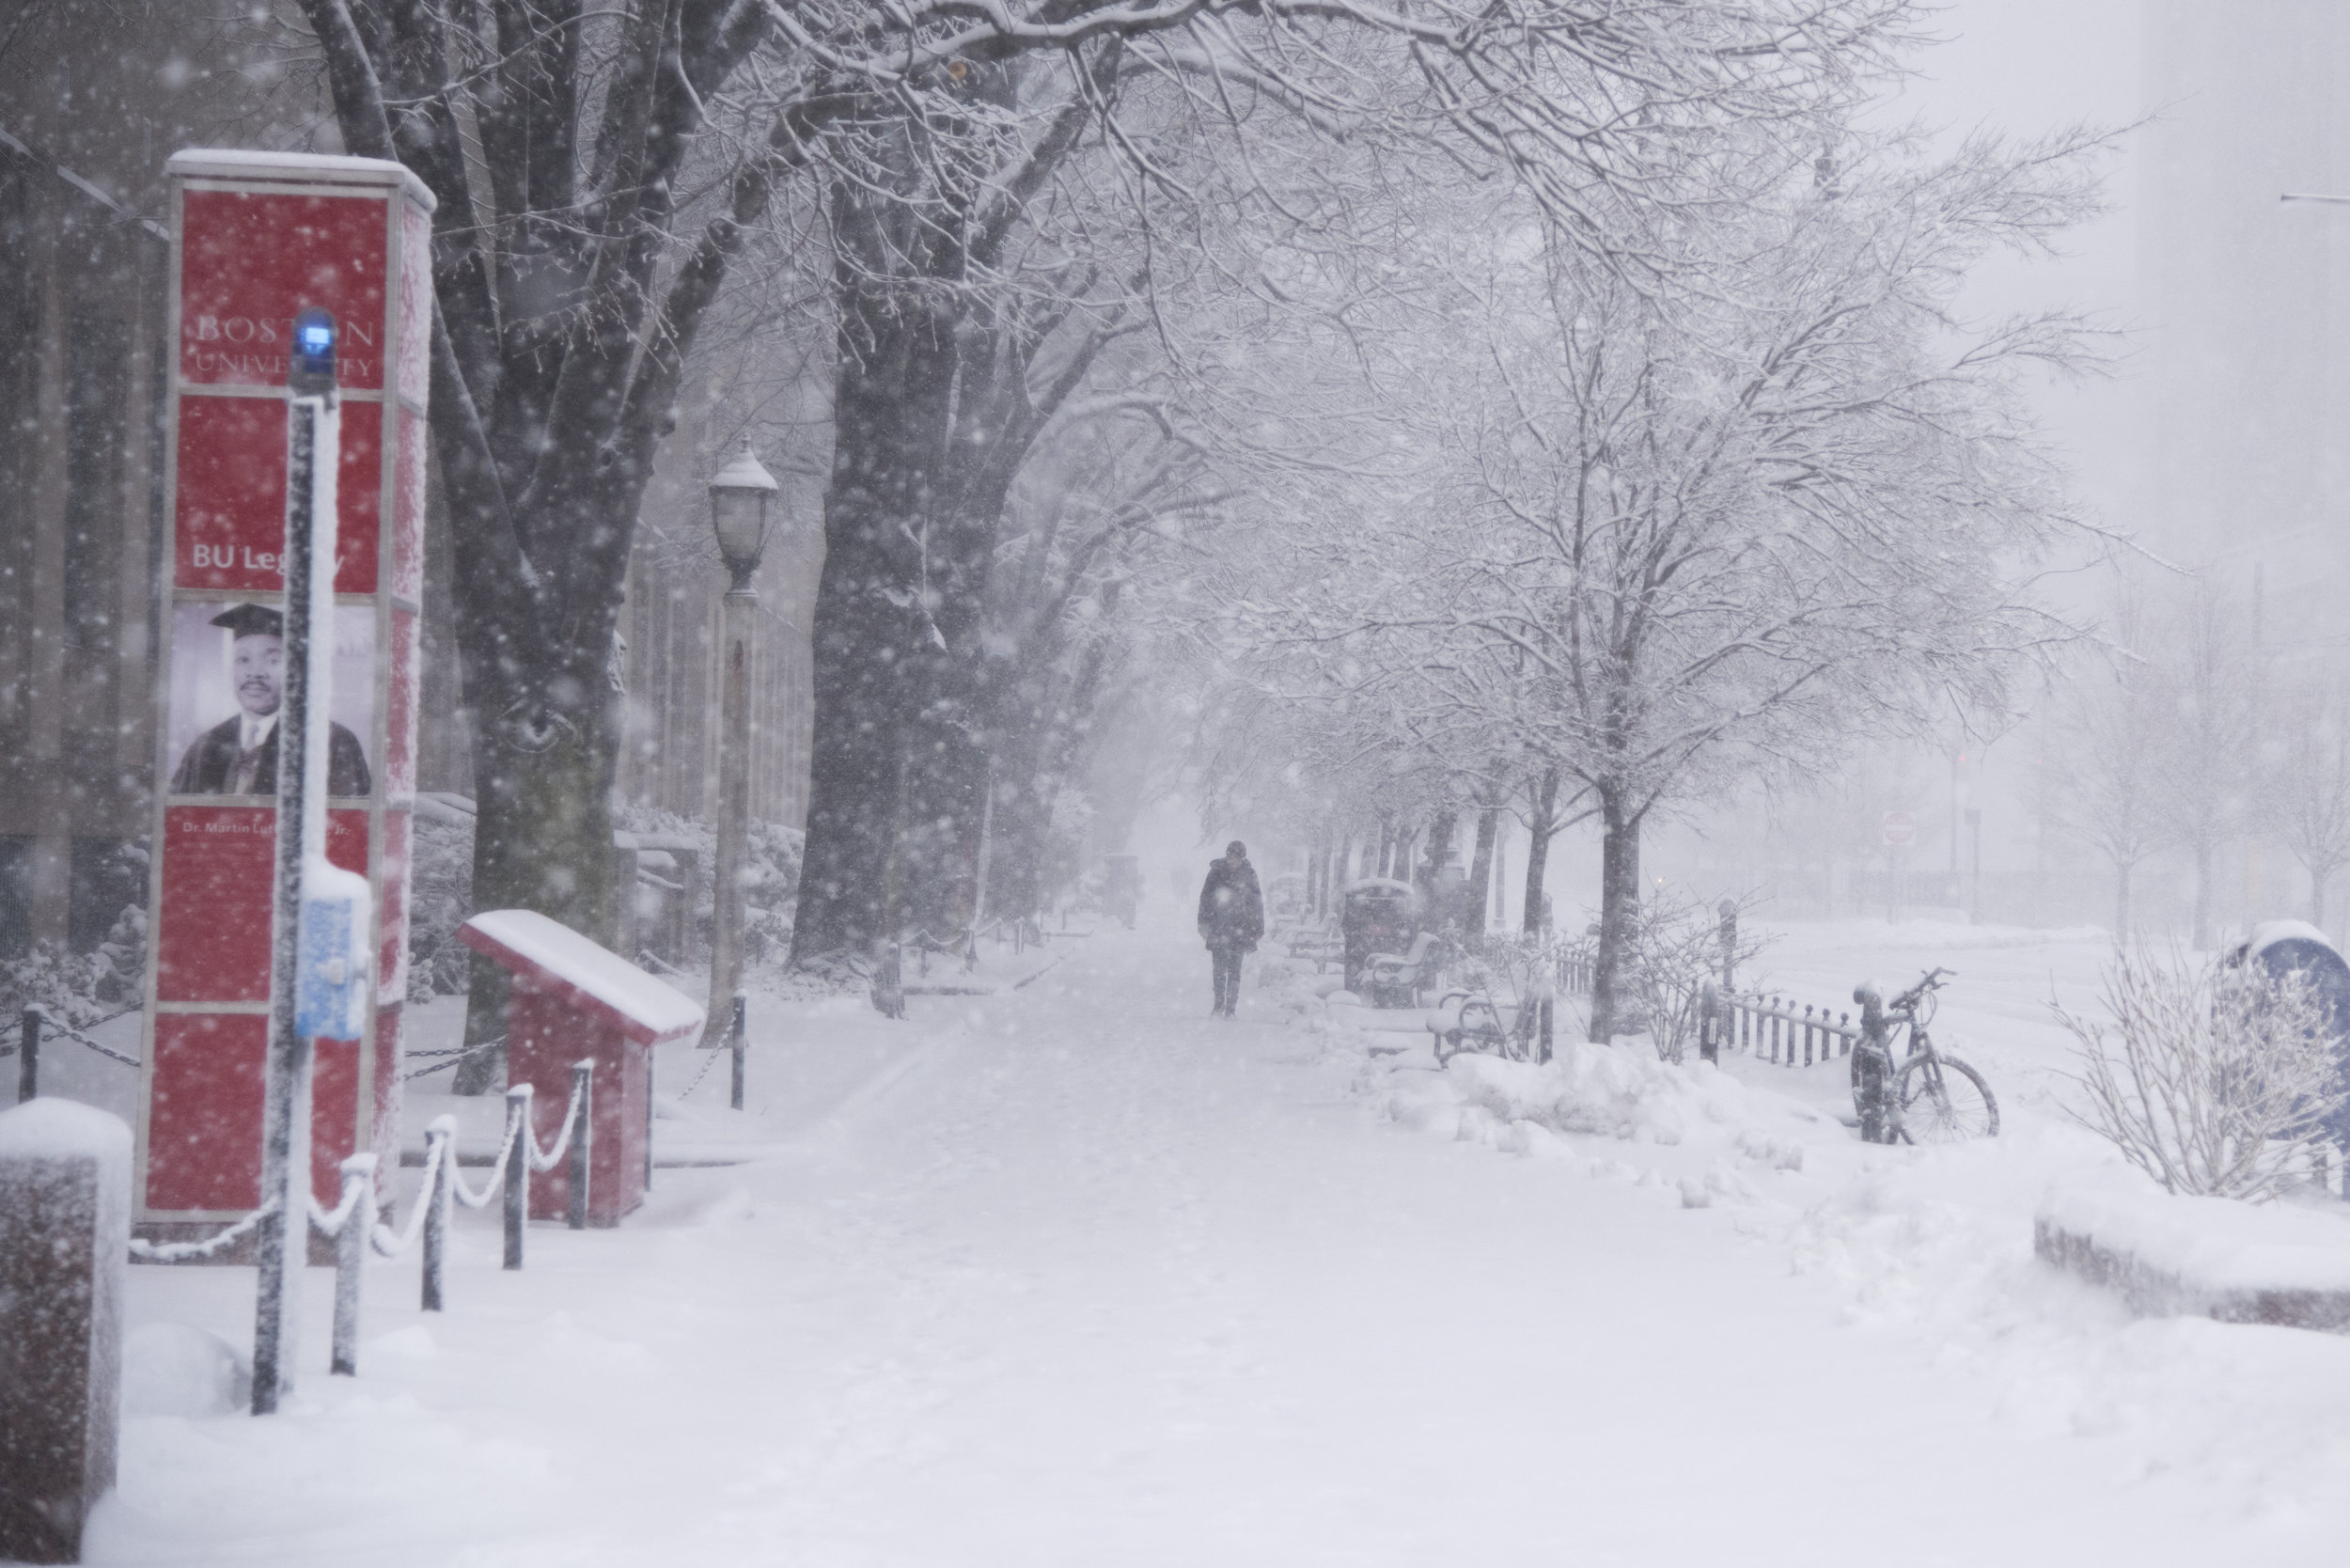  Commonwealth Avenue, usually bustling with Boston University students, becomes a snowy wonderland during New England's third nor'easter in two weeks on February 28. The storm brought blizzard-like conditions and the cancellation of classes at Boston